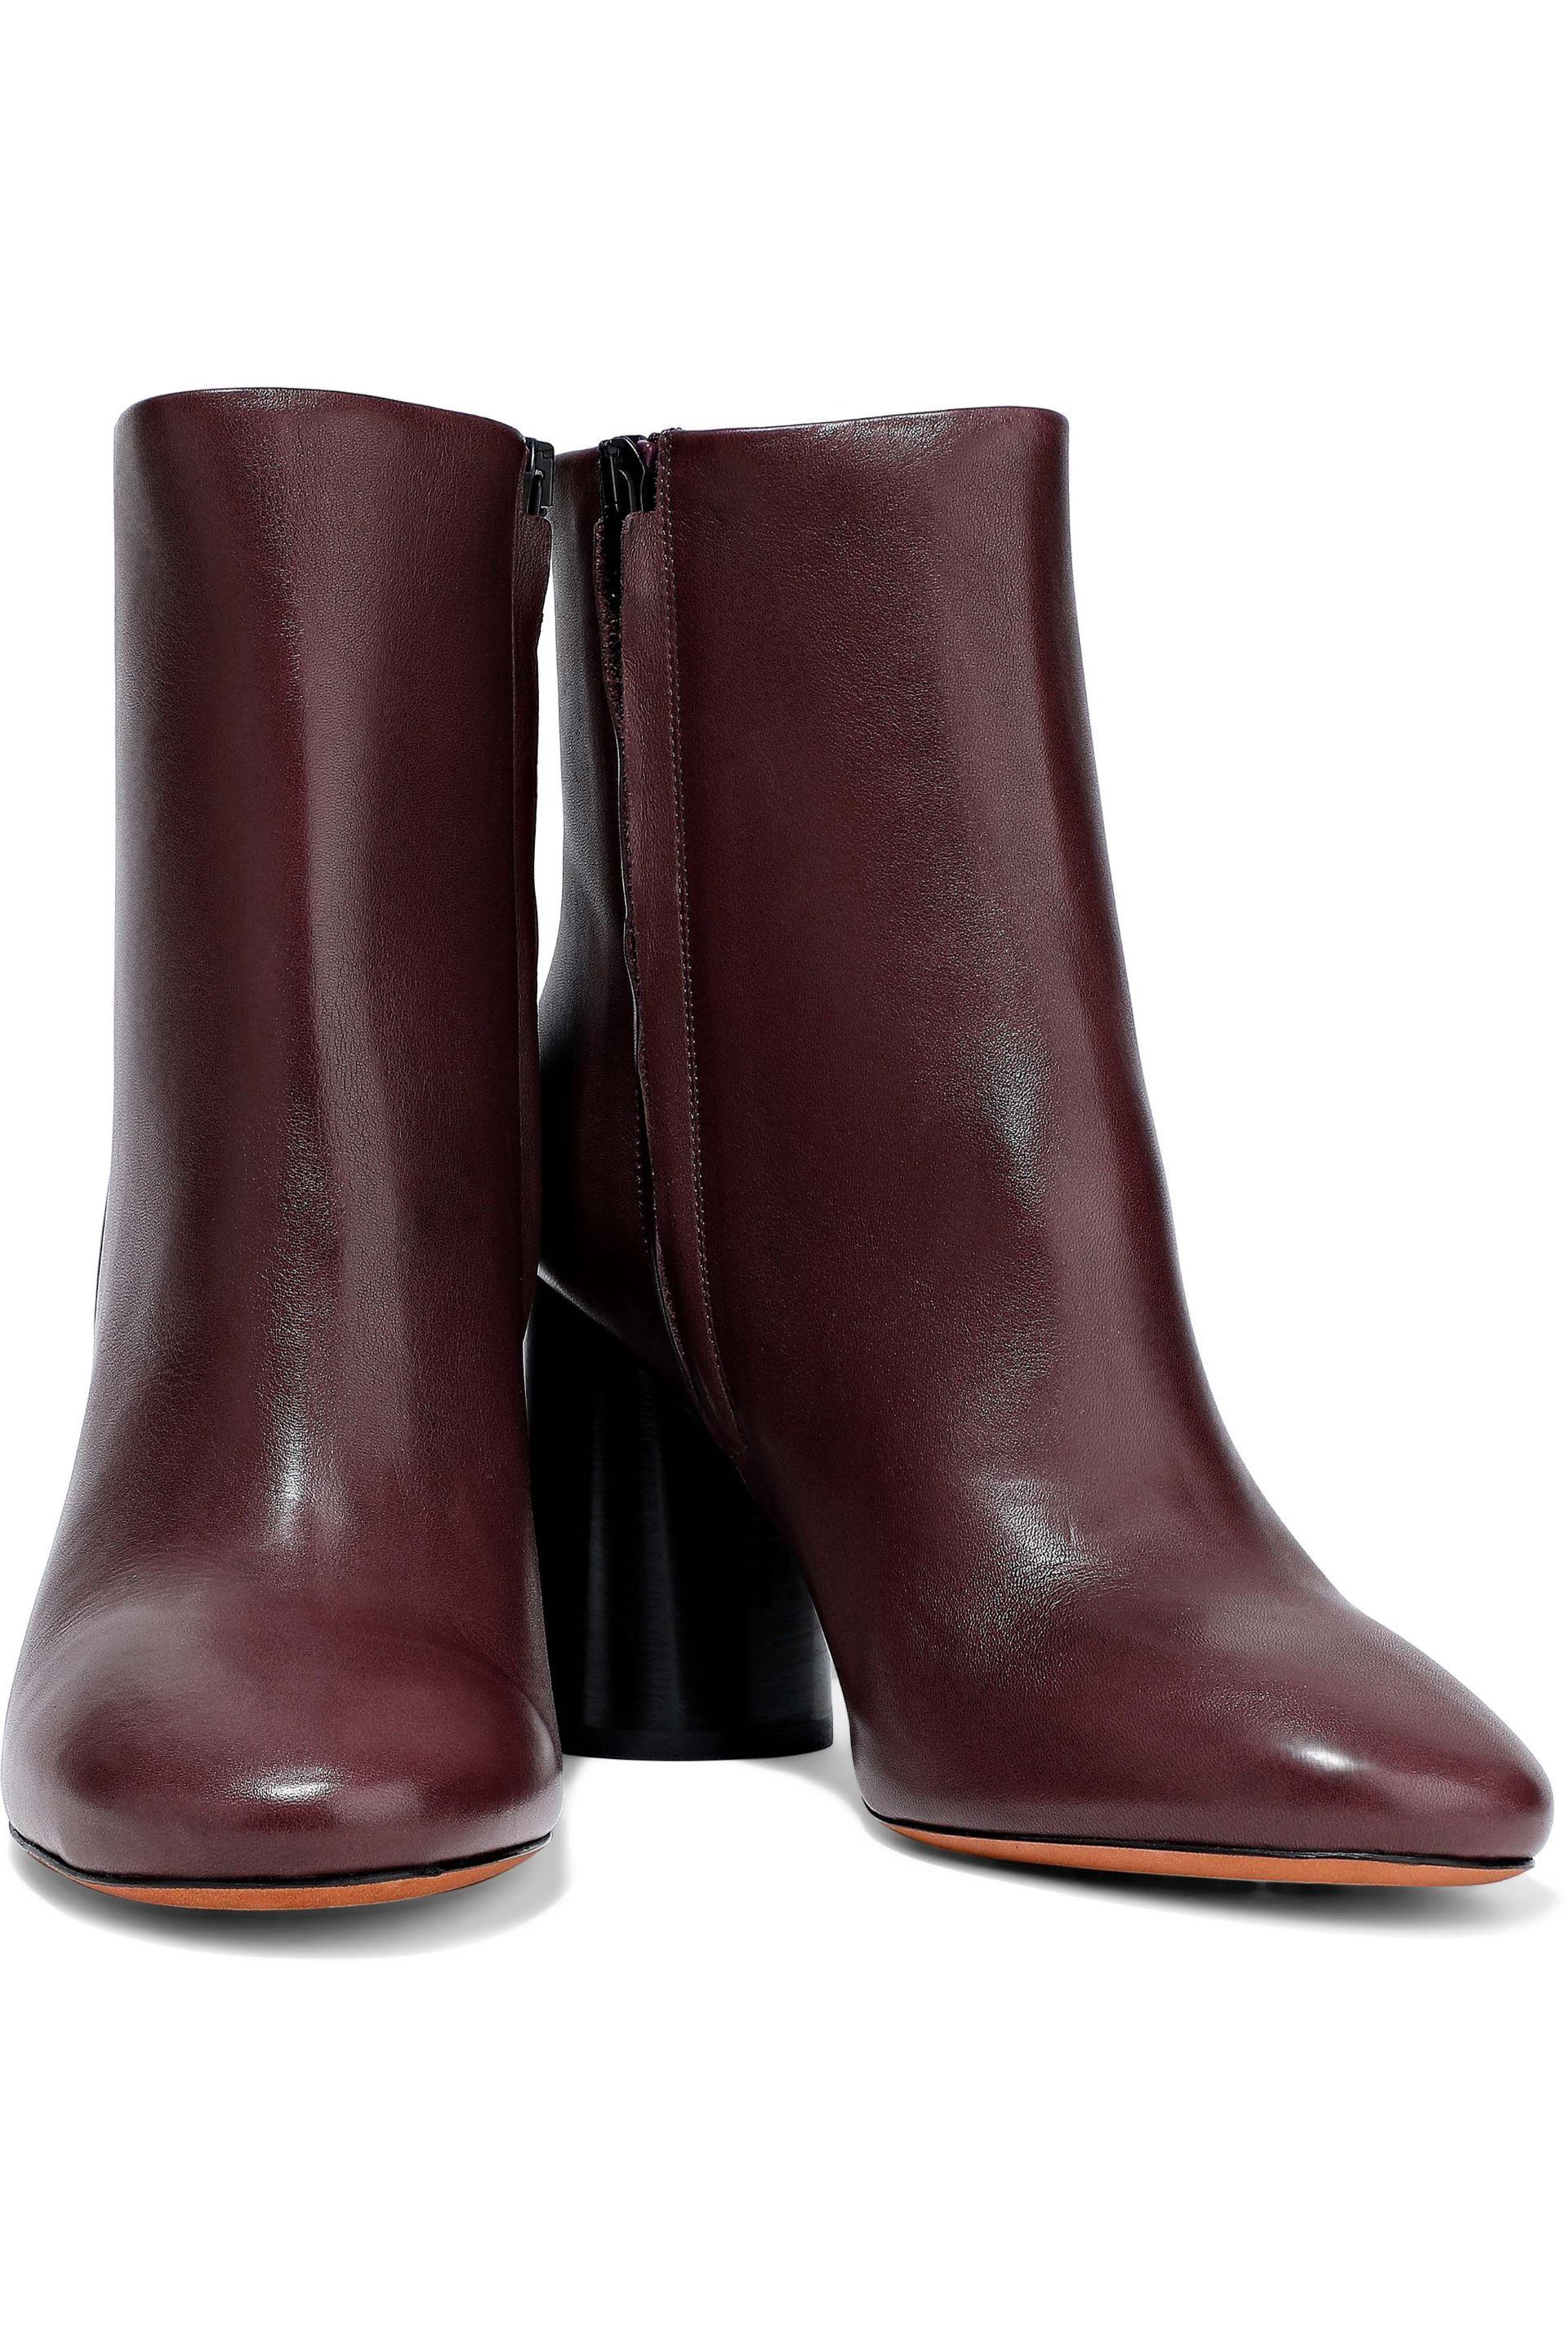 Vince Ridley Leather Ankle Boots Plum in Purple - Lyst